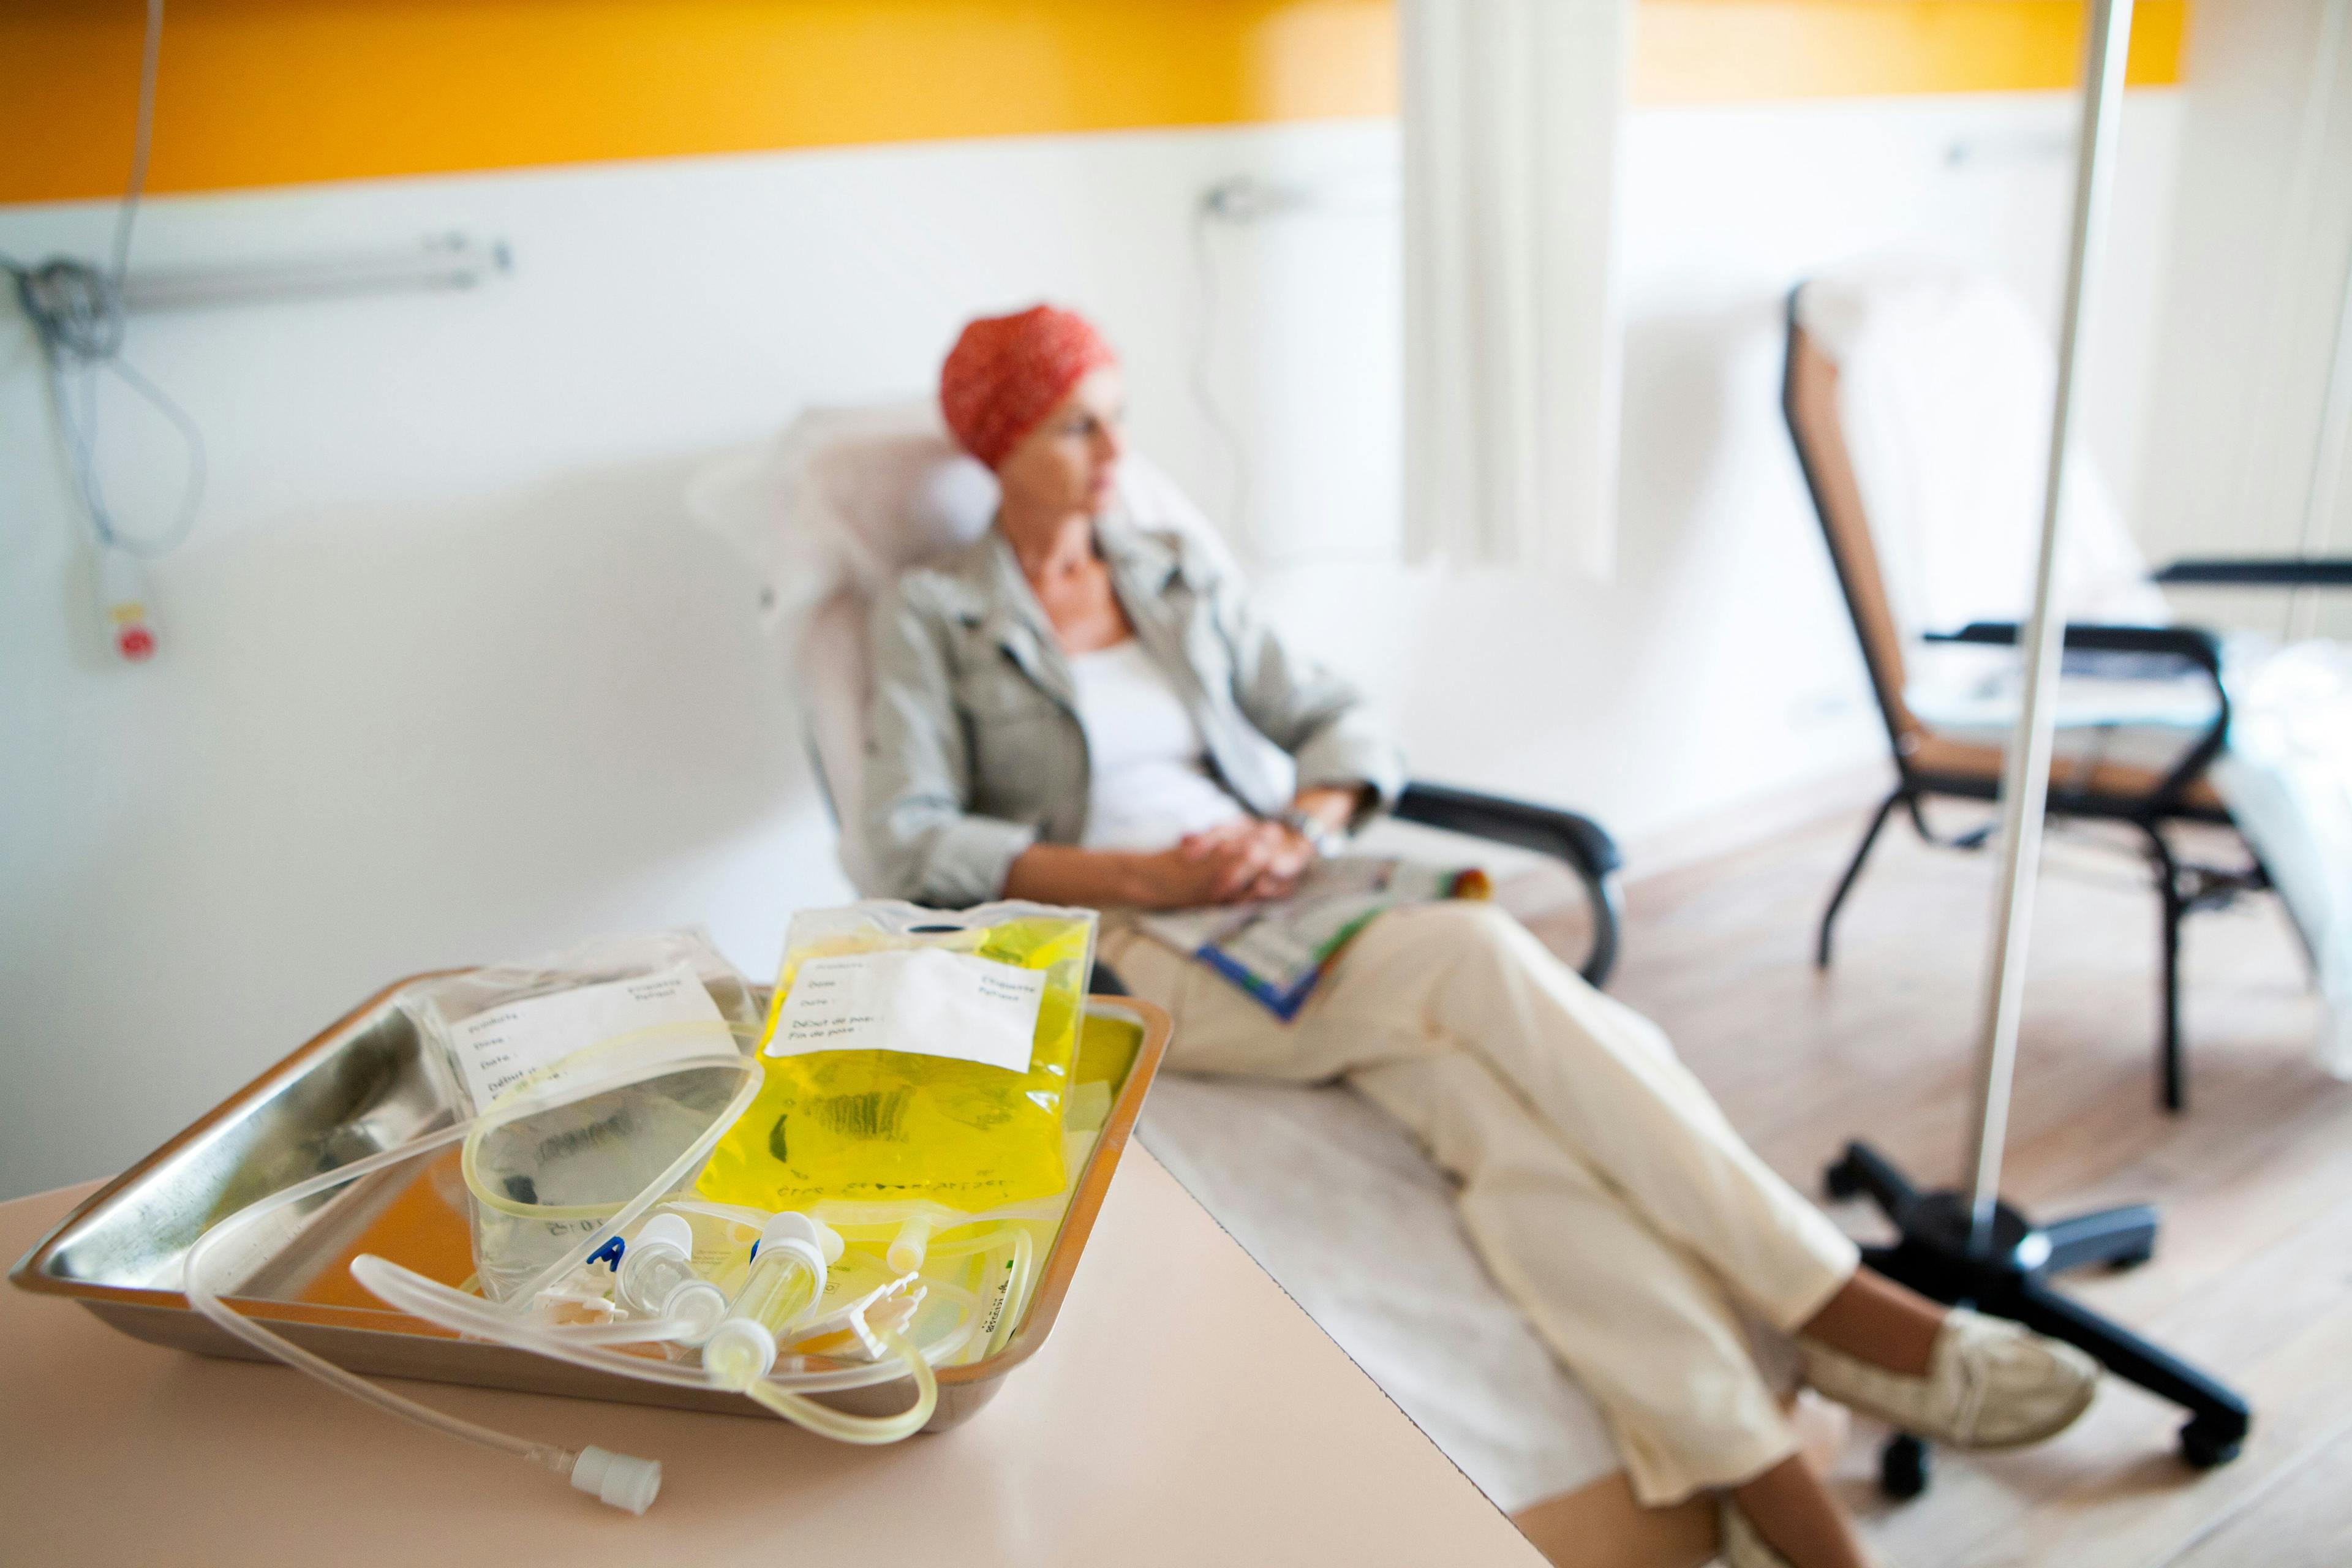 cancer therapy | Image credit: RFBSIP - stock.adobe.com